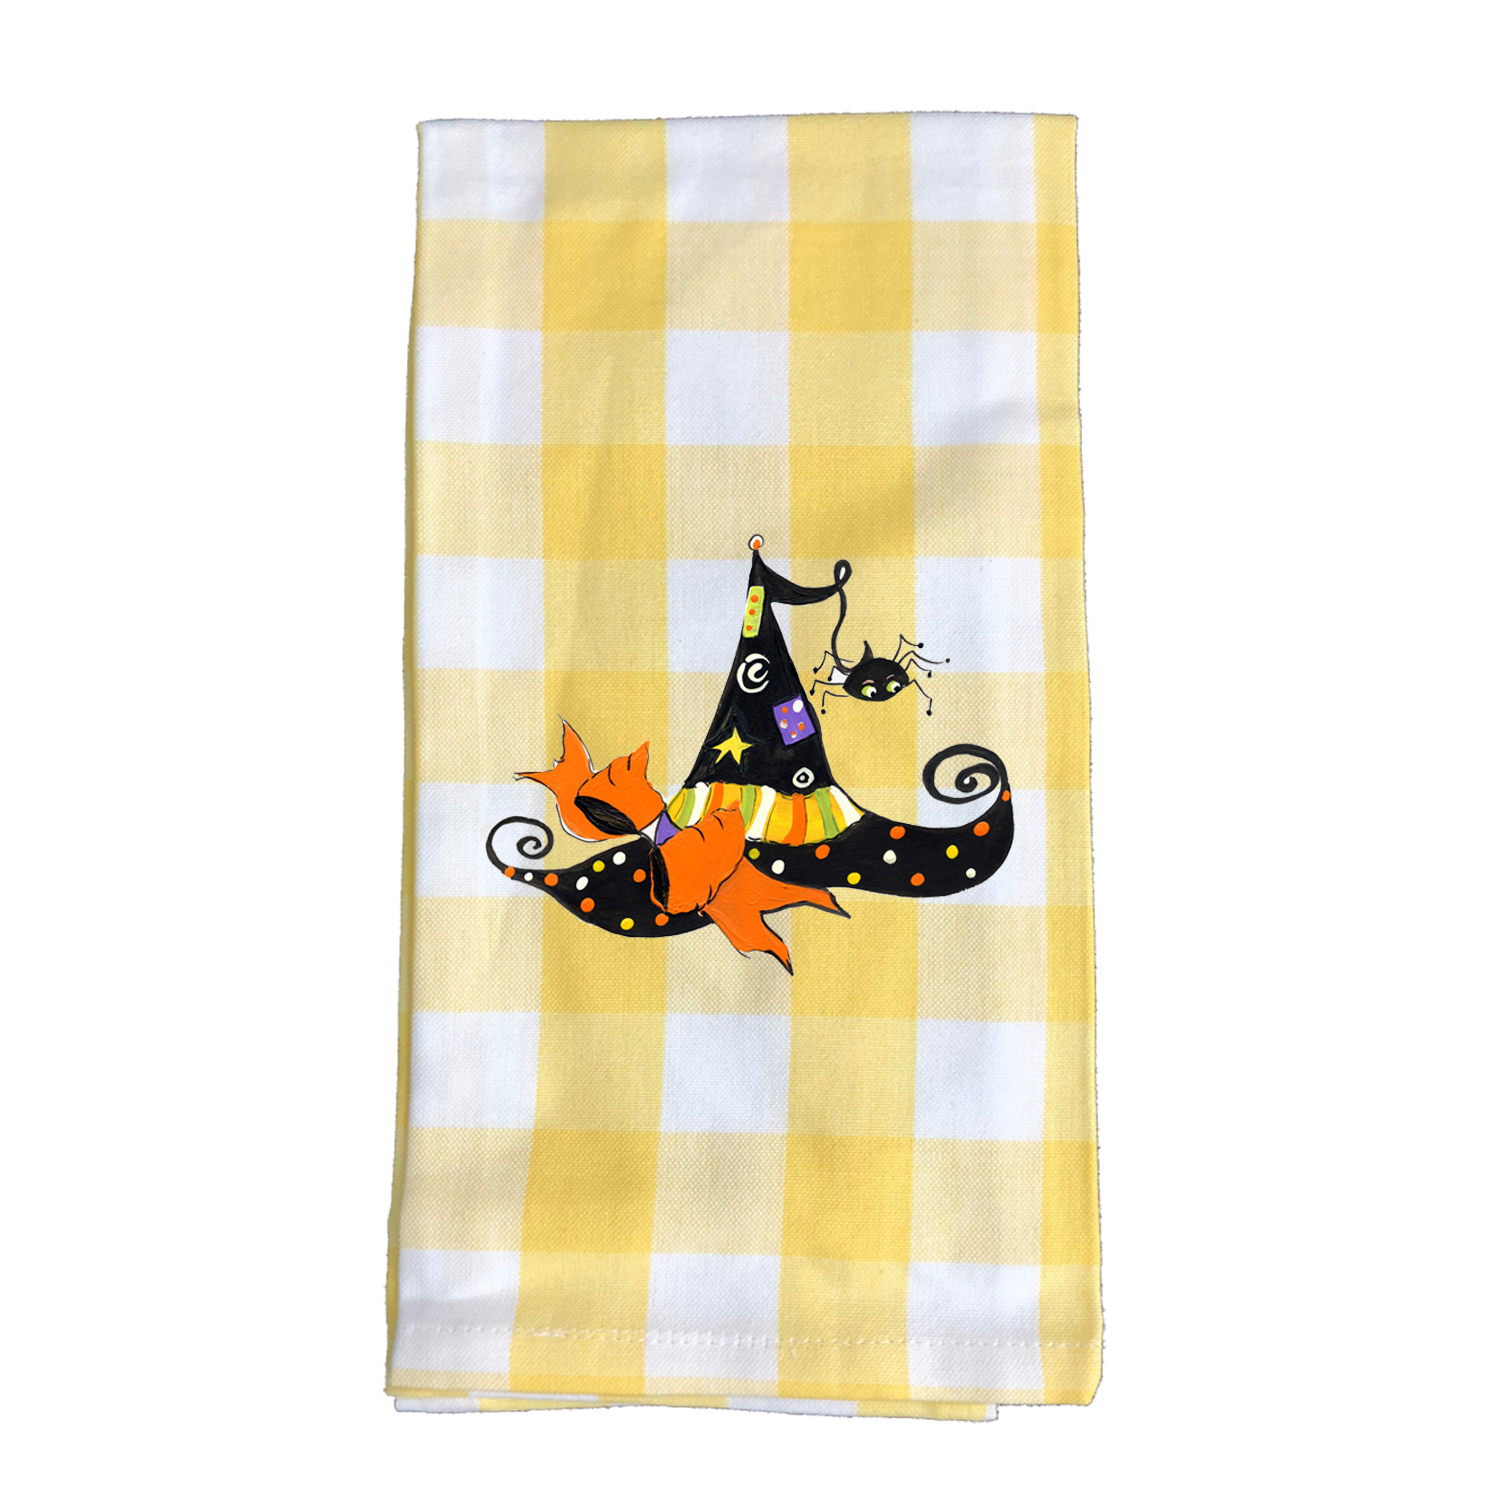 Kitchen Towel Fall 714 Girls love to be wicked YC